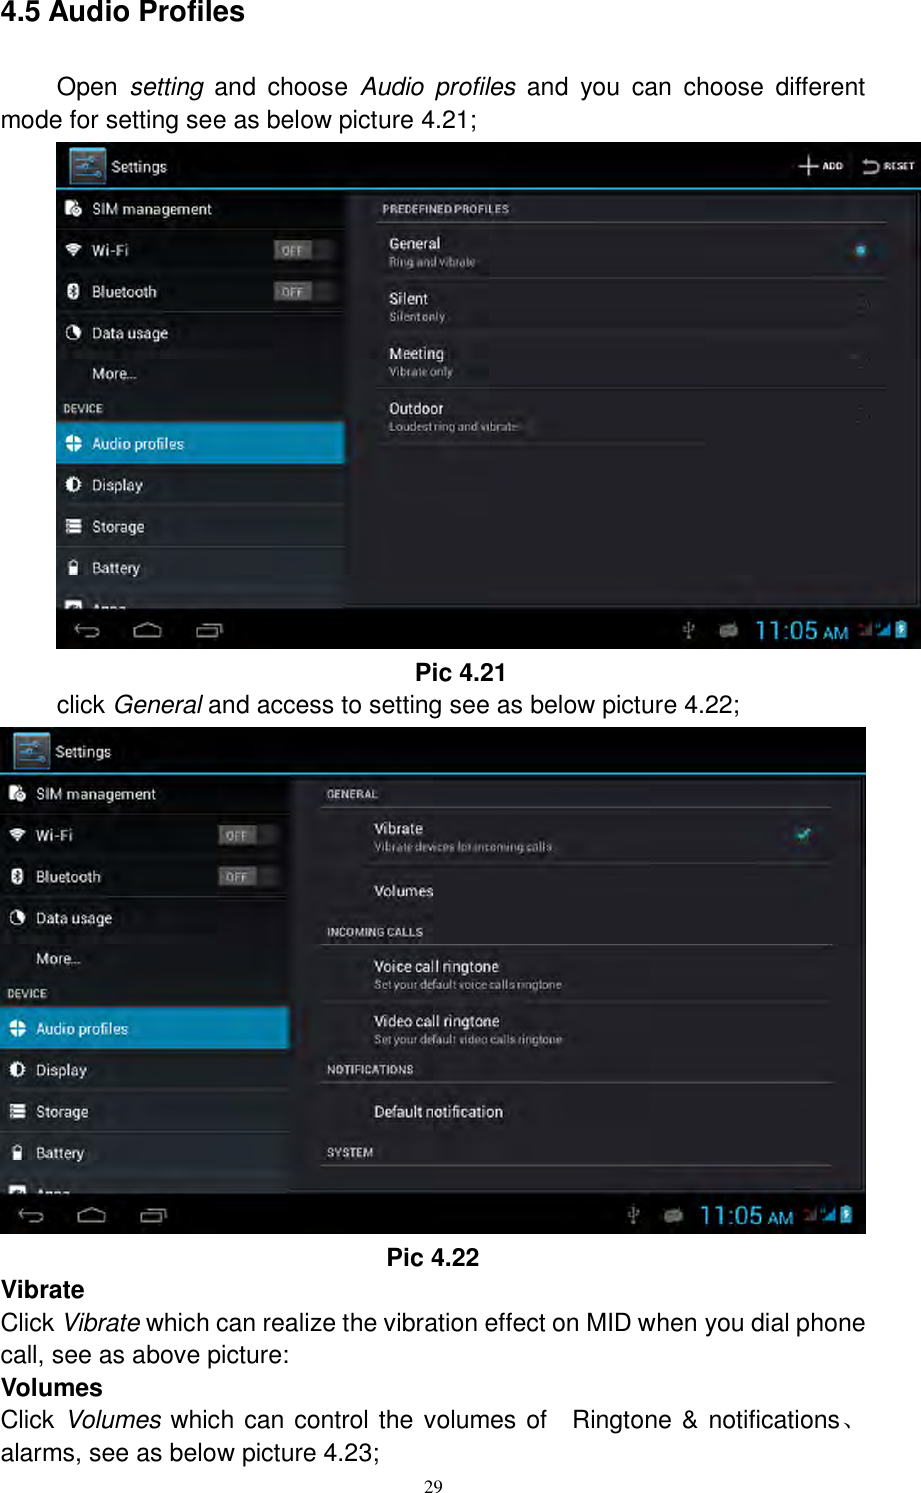      29 4.5 Audio Profiles   Open  setting  and  choose  Audio  profiles  and  you  can  choose  different mode for setting see as below picture 4.21;  Pic 4.21 click General and access to setting see as below picture 4.22;  Pic 4.22 Vibrate Click Vibrate which can realize the vibration effect on MID when you dial phone call, see as above picture: Volumes Click Volumes which can control the volumes of    Ringtone &amp; notifications、alarms, see as below picture 4.23; 